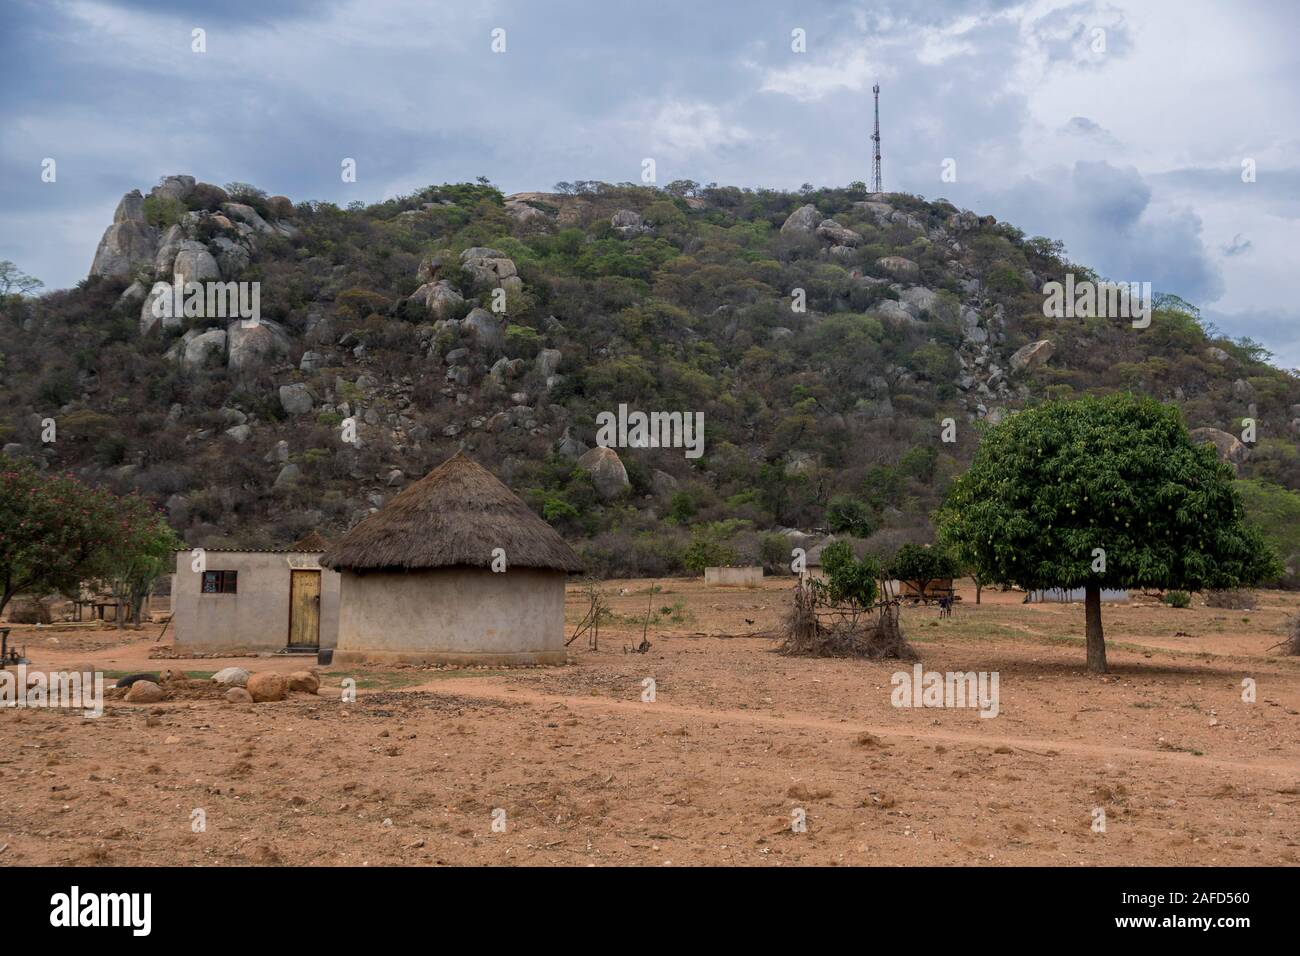 PZimbabwe. Dzapasi Assembly point (AP Foxtrot) national monument, at the site of the largest guerilla assembly point after the 1979 ceasefire between the Zimbabwe-Rhodesia government and the ZANLA and ZIPRA guerilla movements. Stock Photo